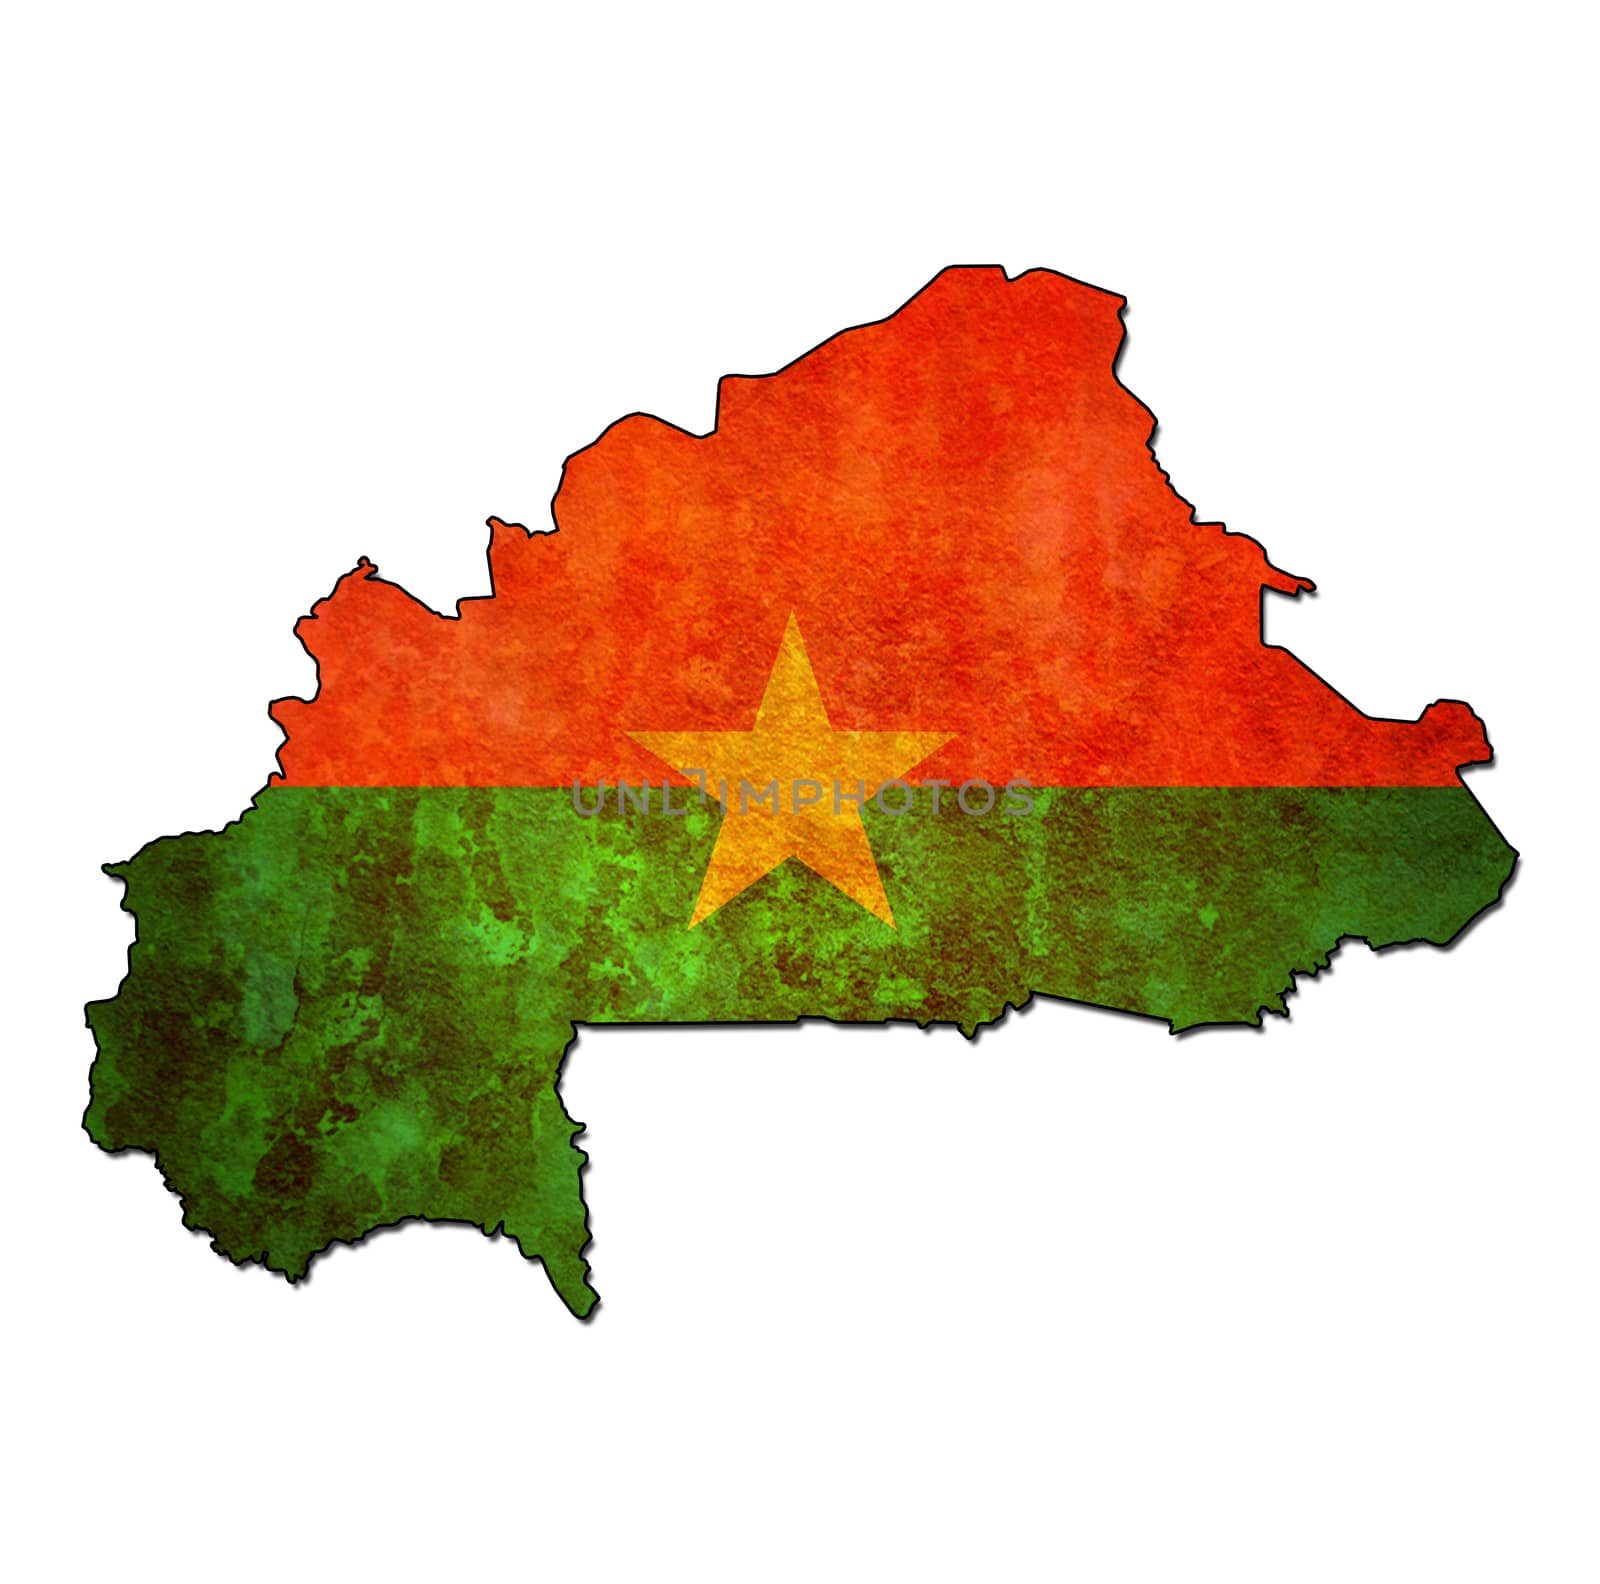 burkina faso territory with flag by michal812